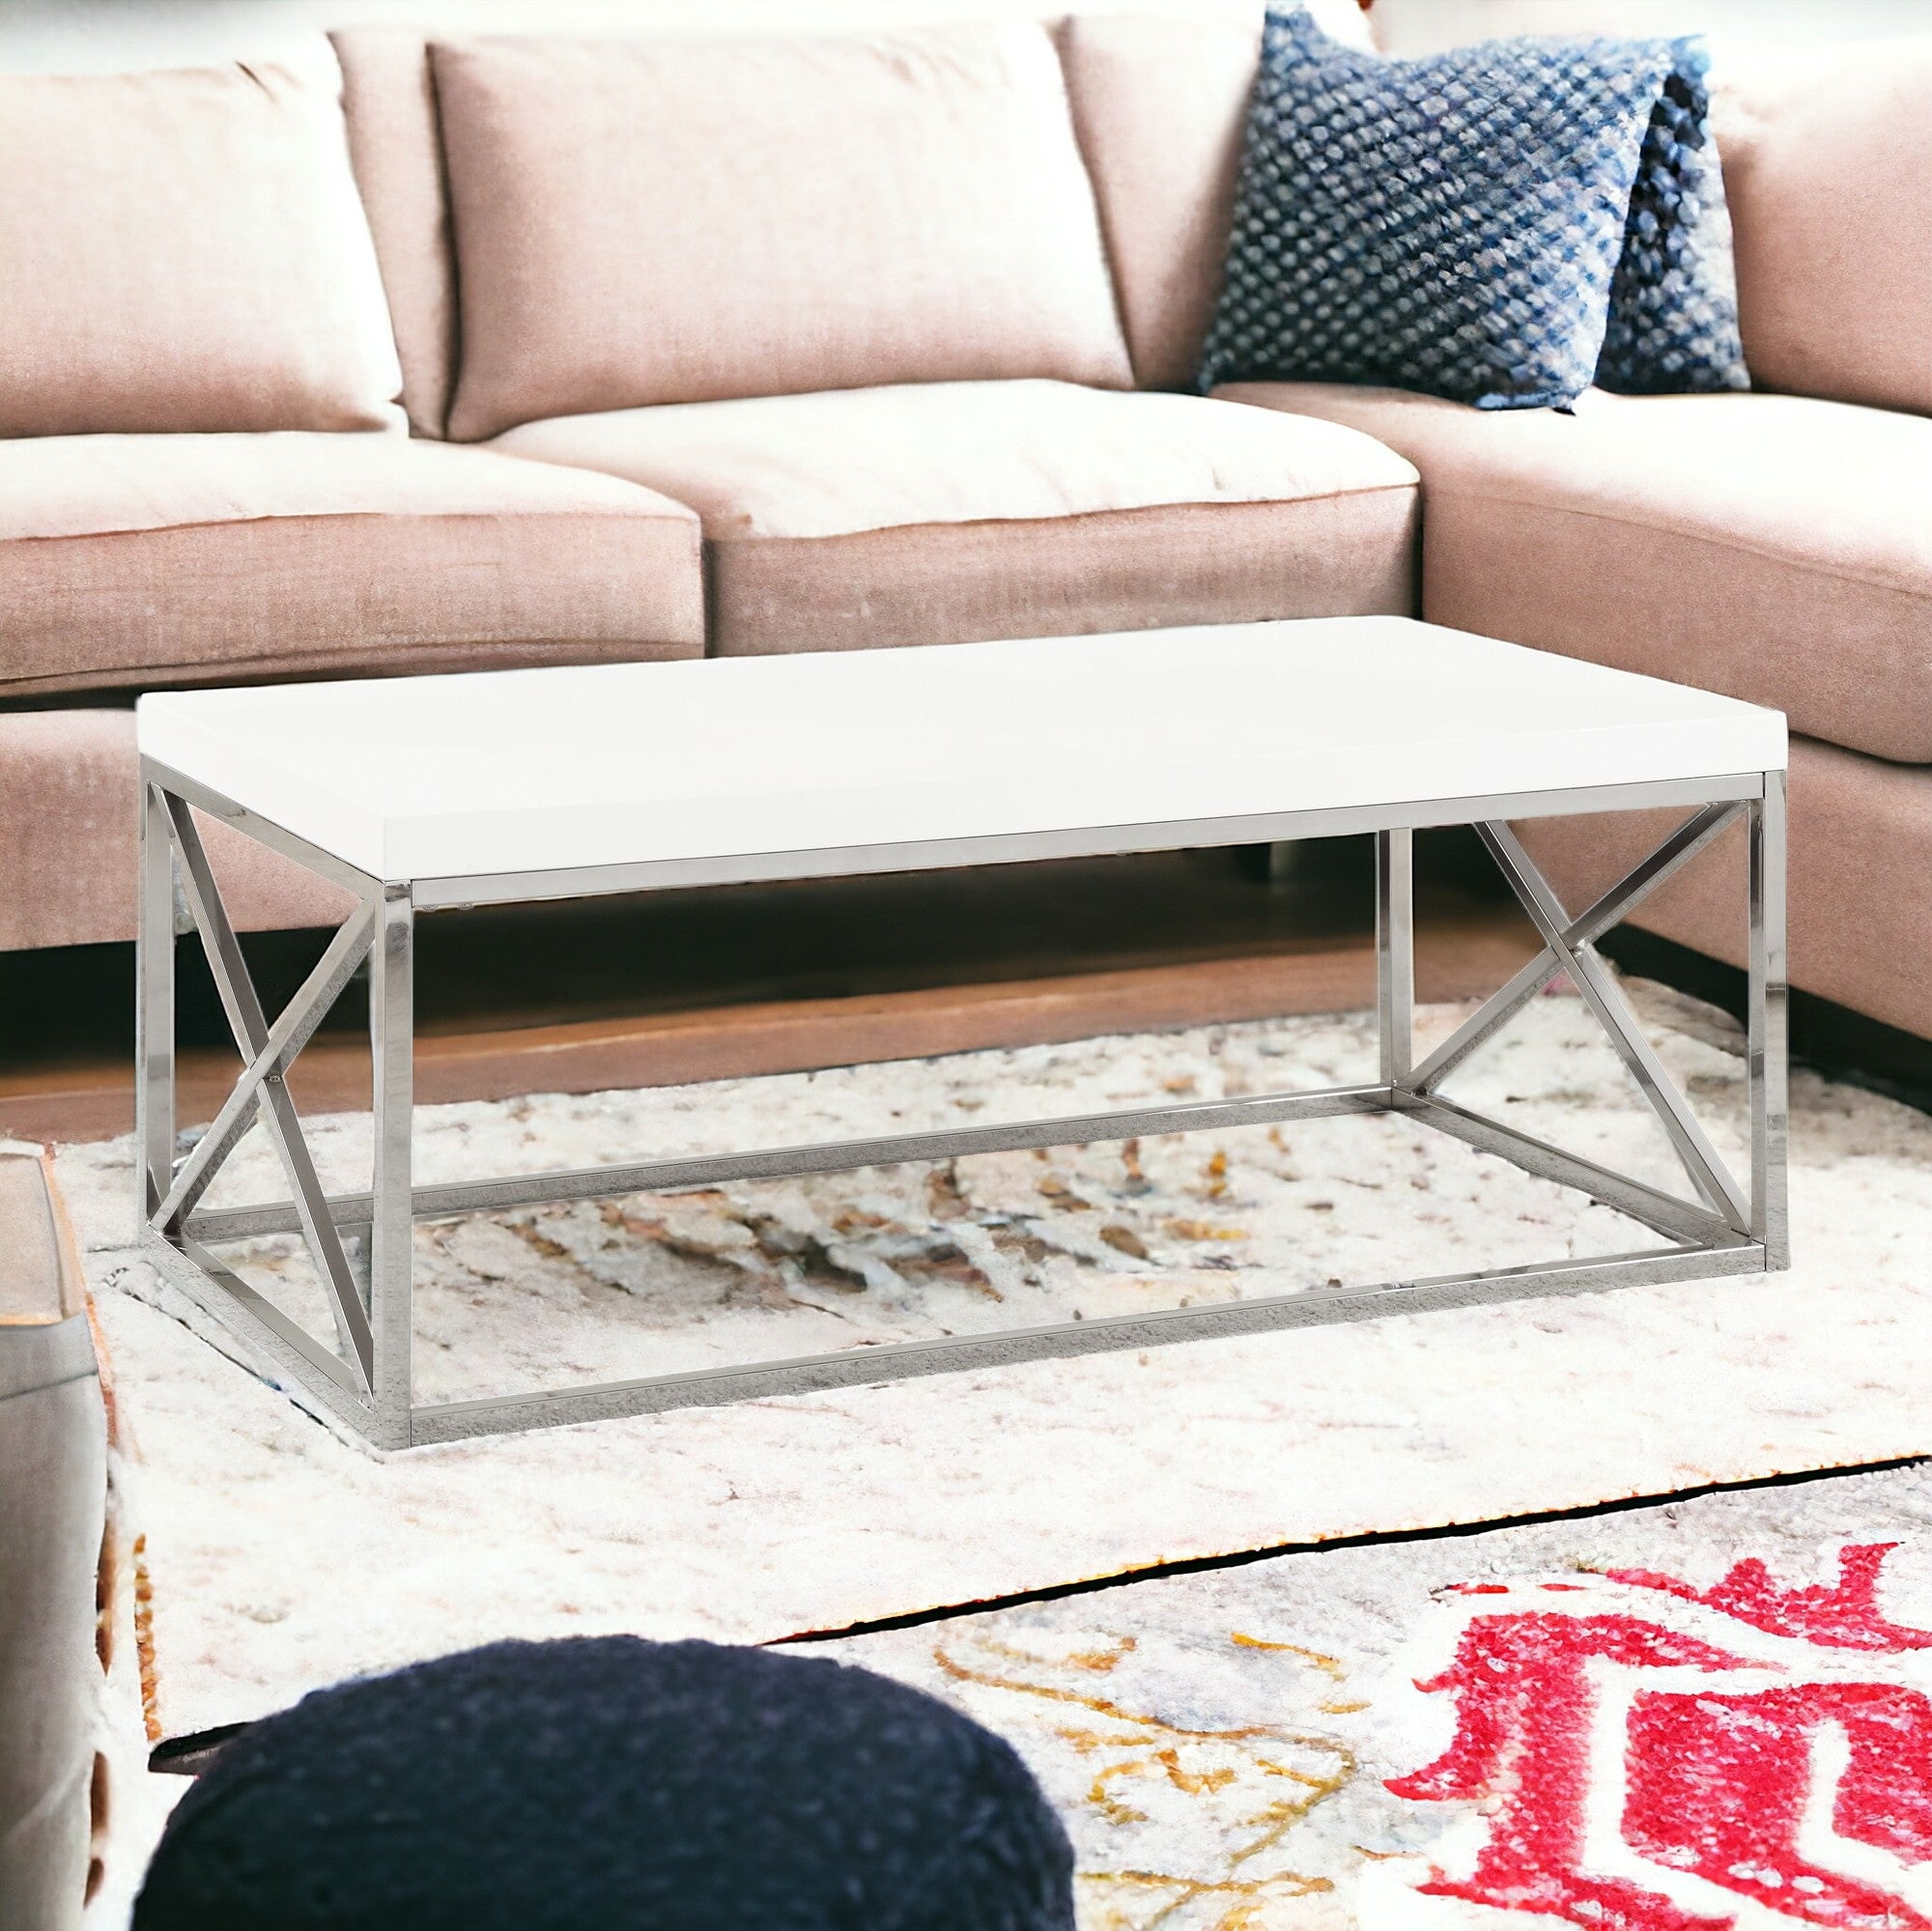 44" White And Silver Iron Coffee Table